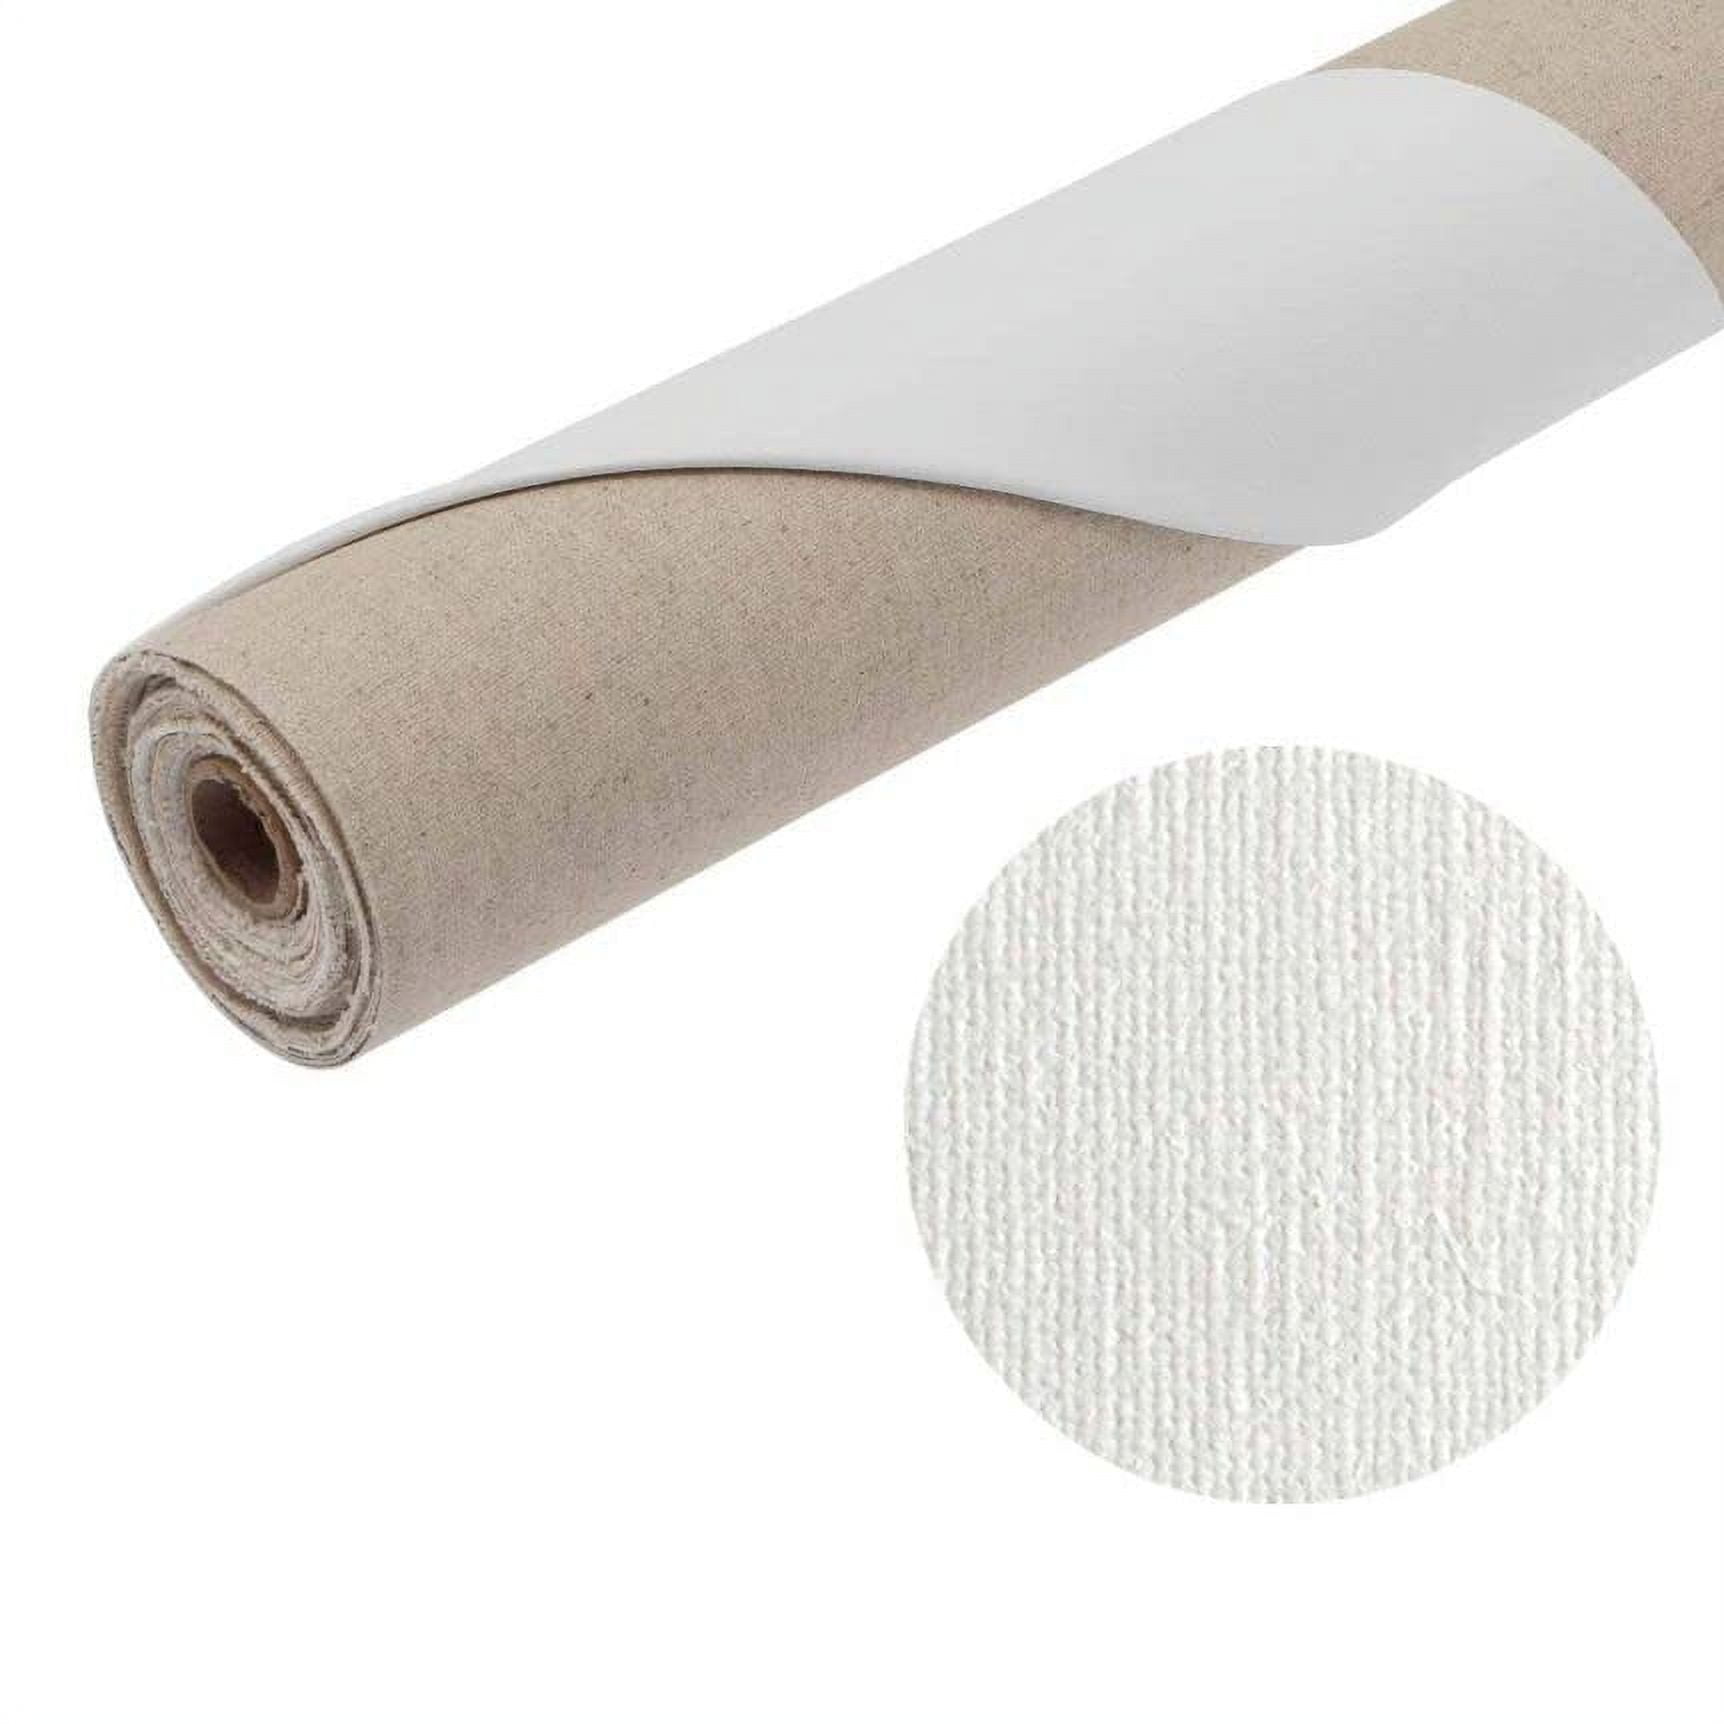 Centurion Artist Linen Canvas Roll for Painting, 11 Ounce Weight,  Universally Primed, 